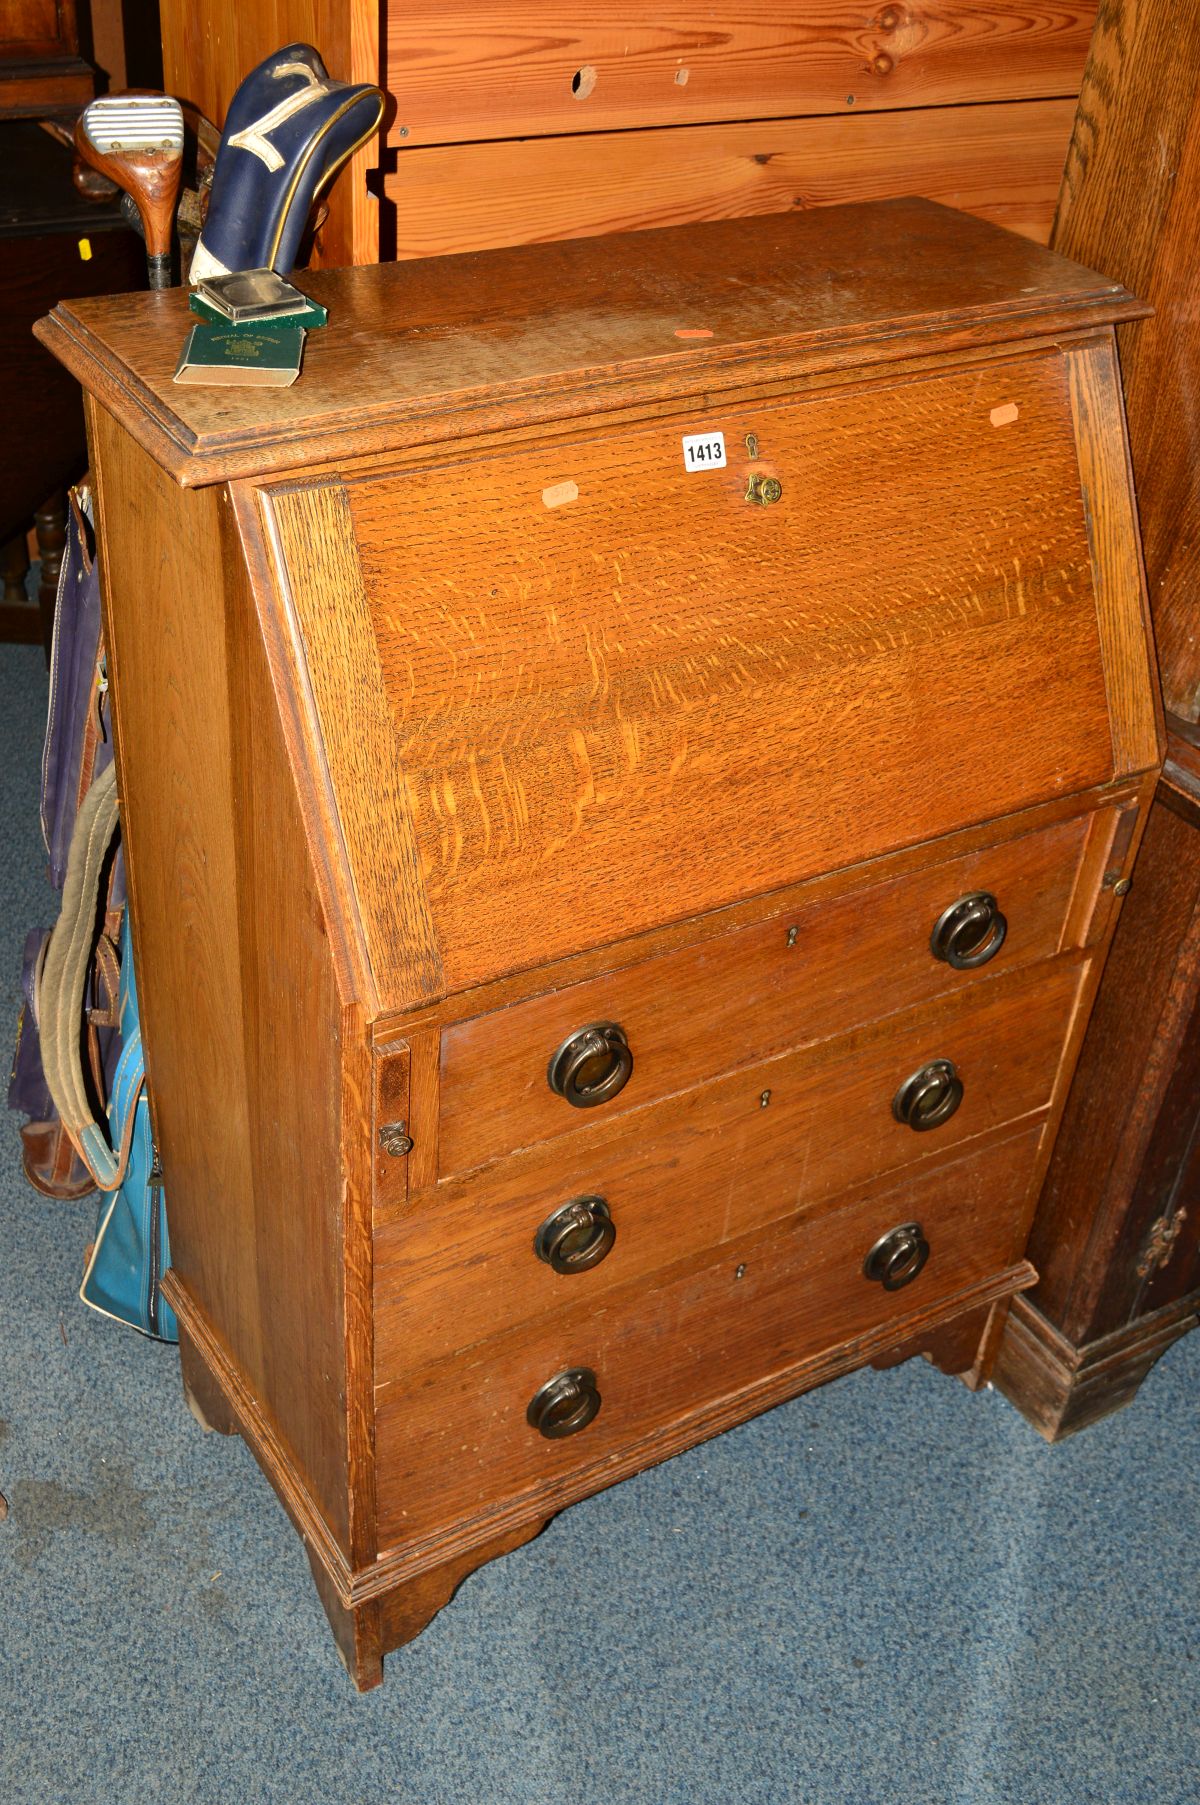 AN OAK FALL FRONT BUREAU with three drawers